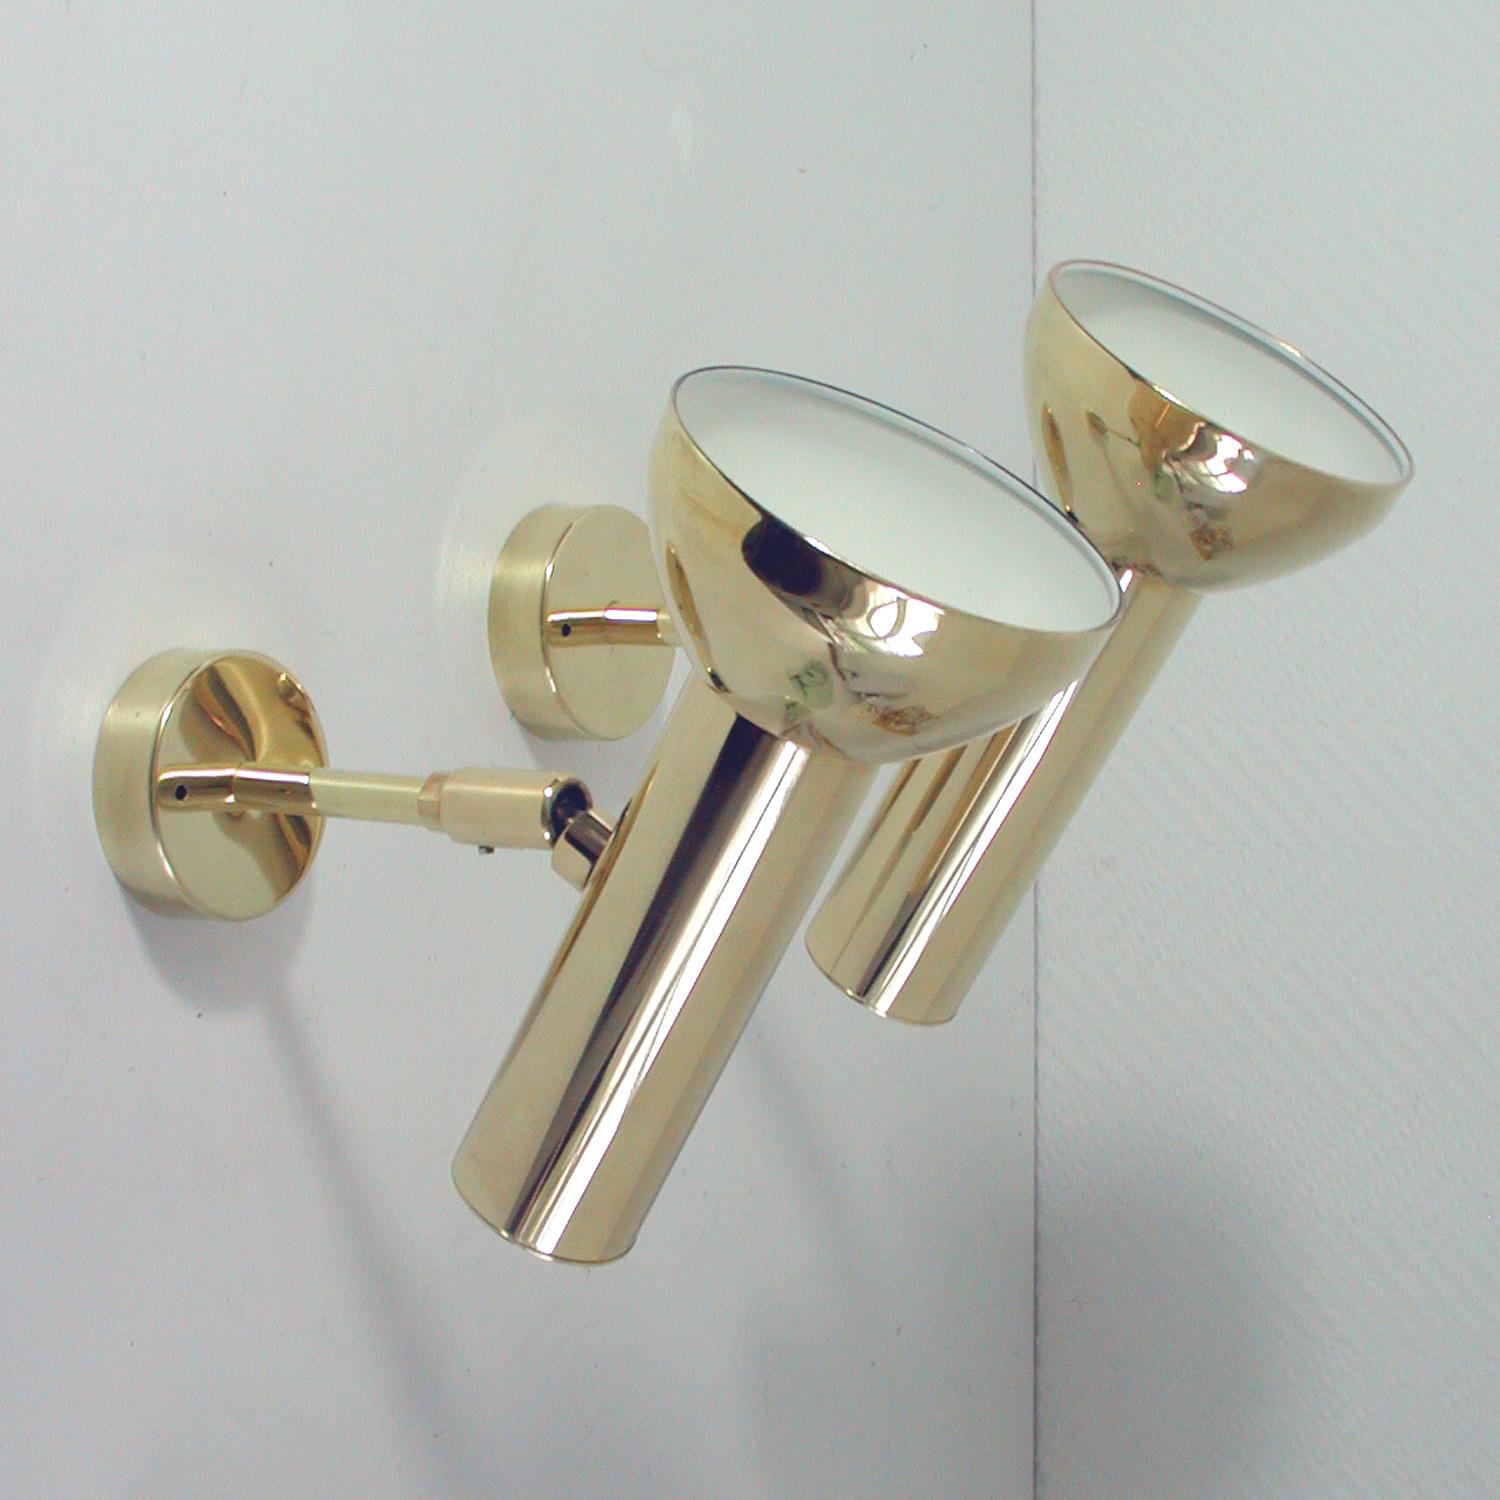 Polished Pair of Midcentury German Brass Wall Lights by Cosack, 1960s For Sale